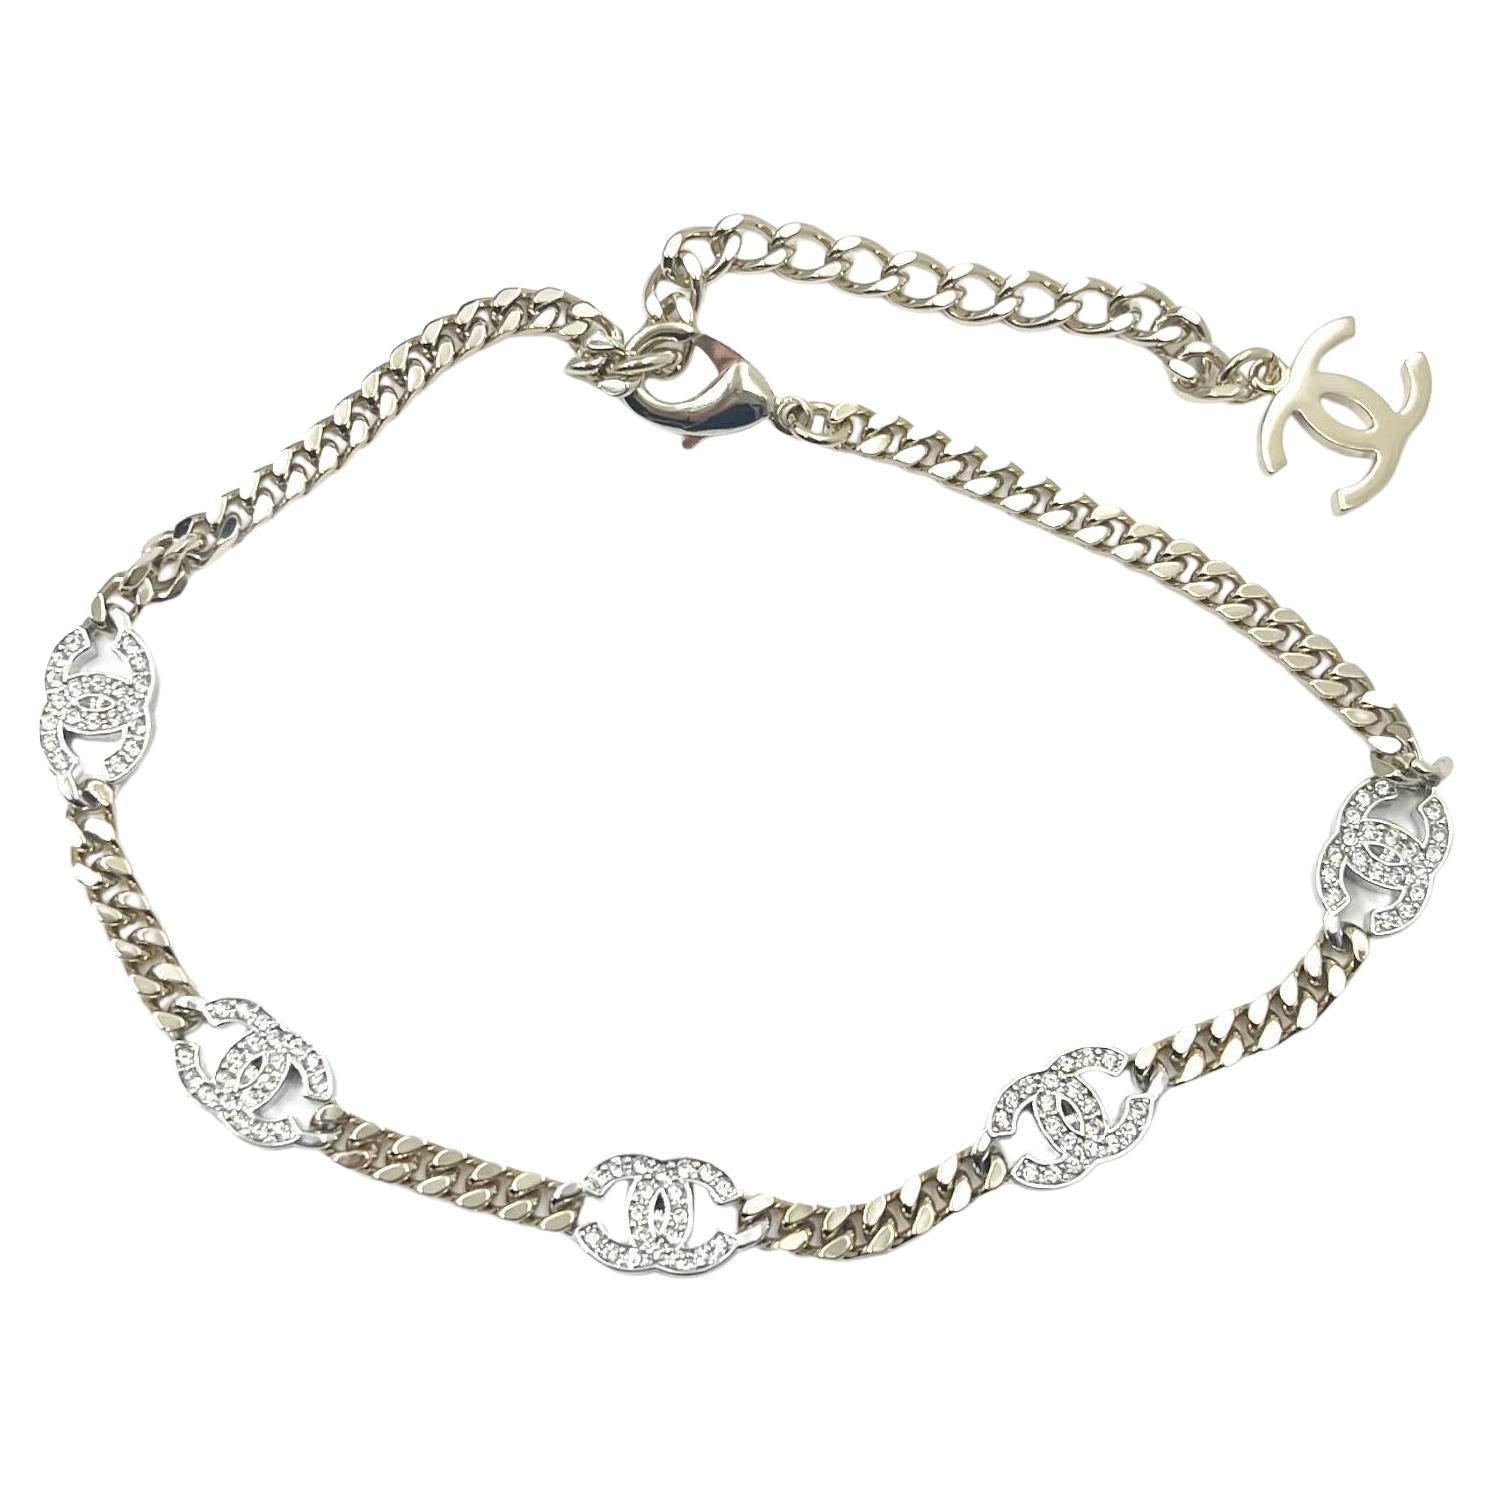 Chanel 5 Silver CC Crystal Gold Chain Choker Necklace